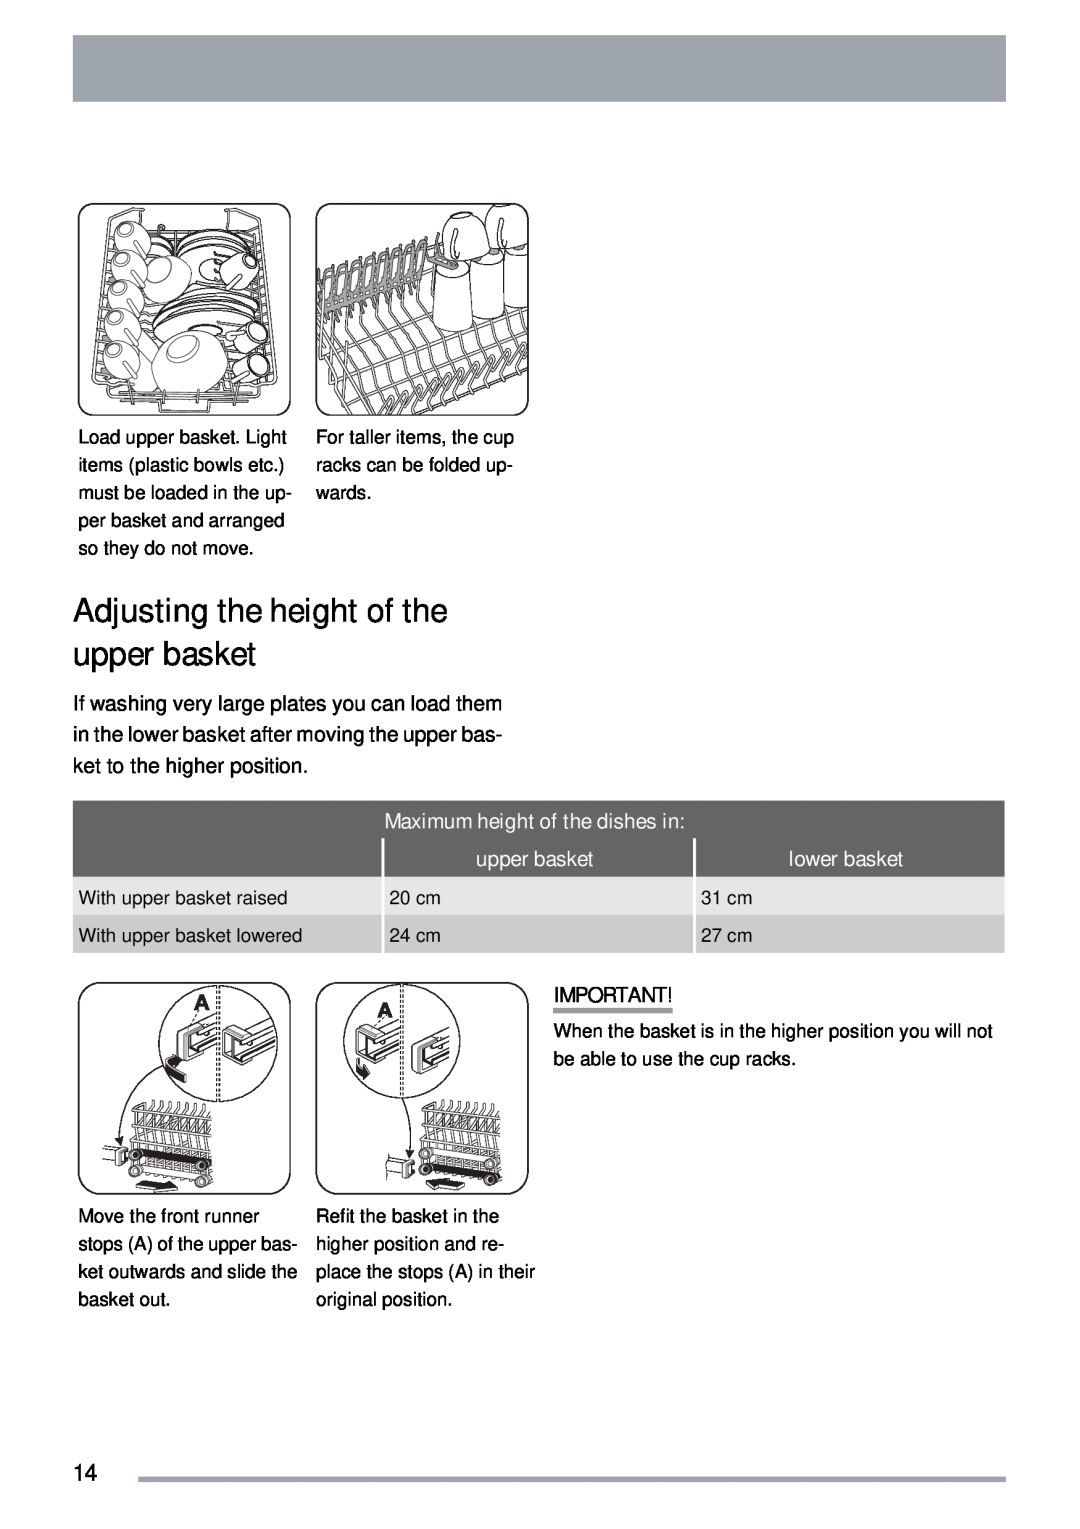 Zanussi ZDTS 101 user manual Adjusting the height of the upper basket, Maximum height of the dishes in, lower basket 